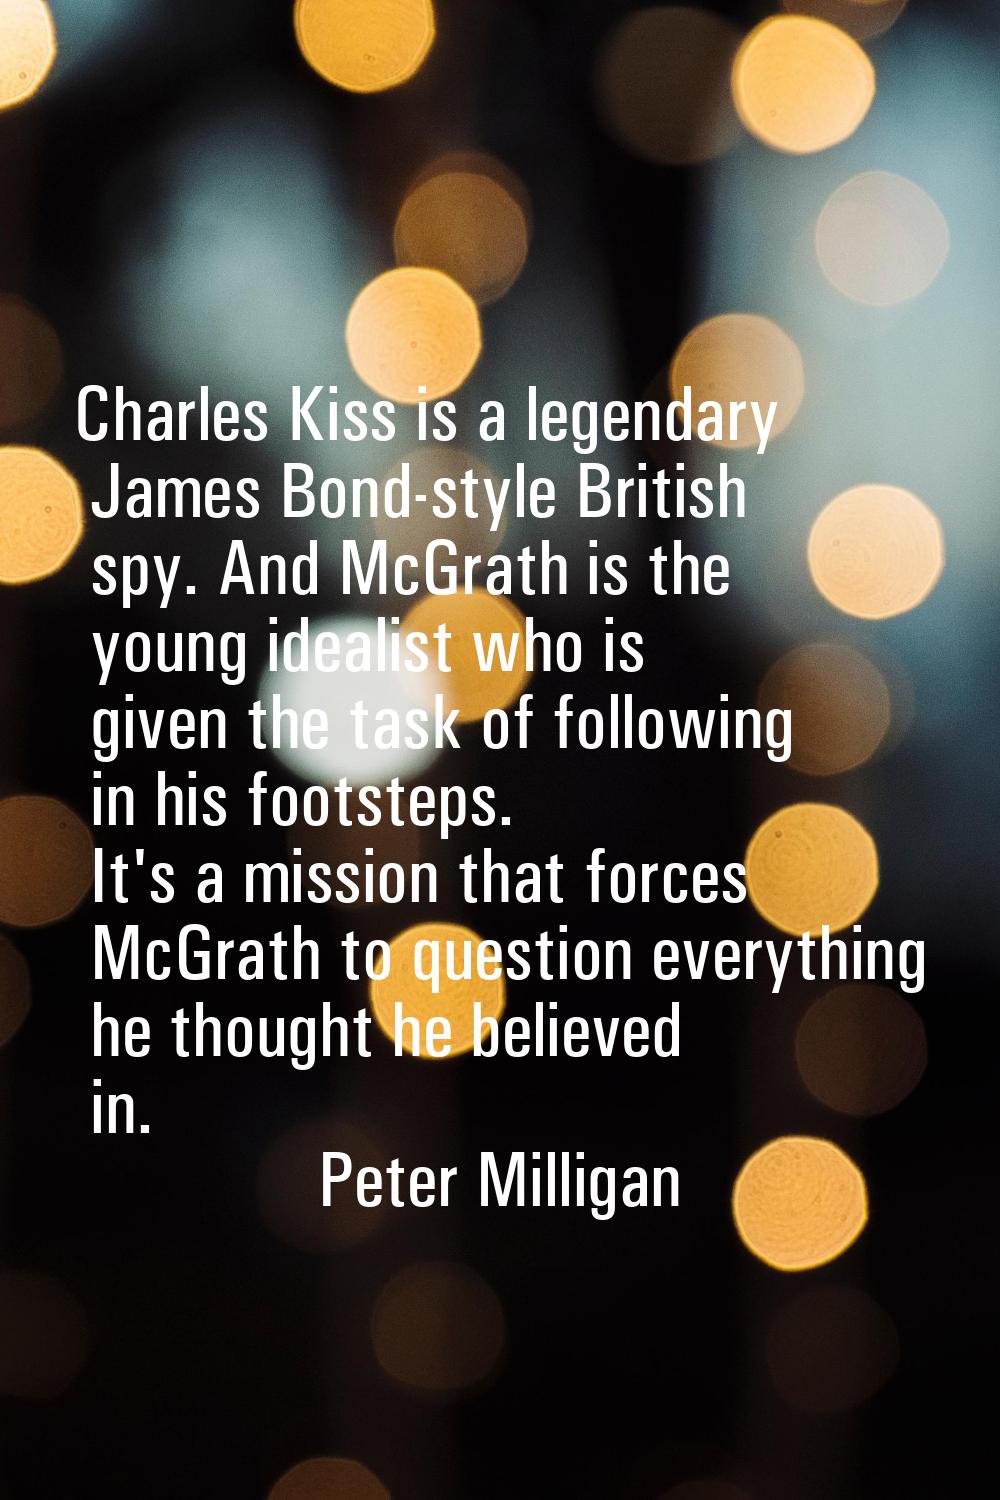 Charles Kiss is a legendary James Bond-style British spy. And McGrath is the young idealist who is 